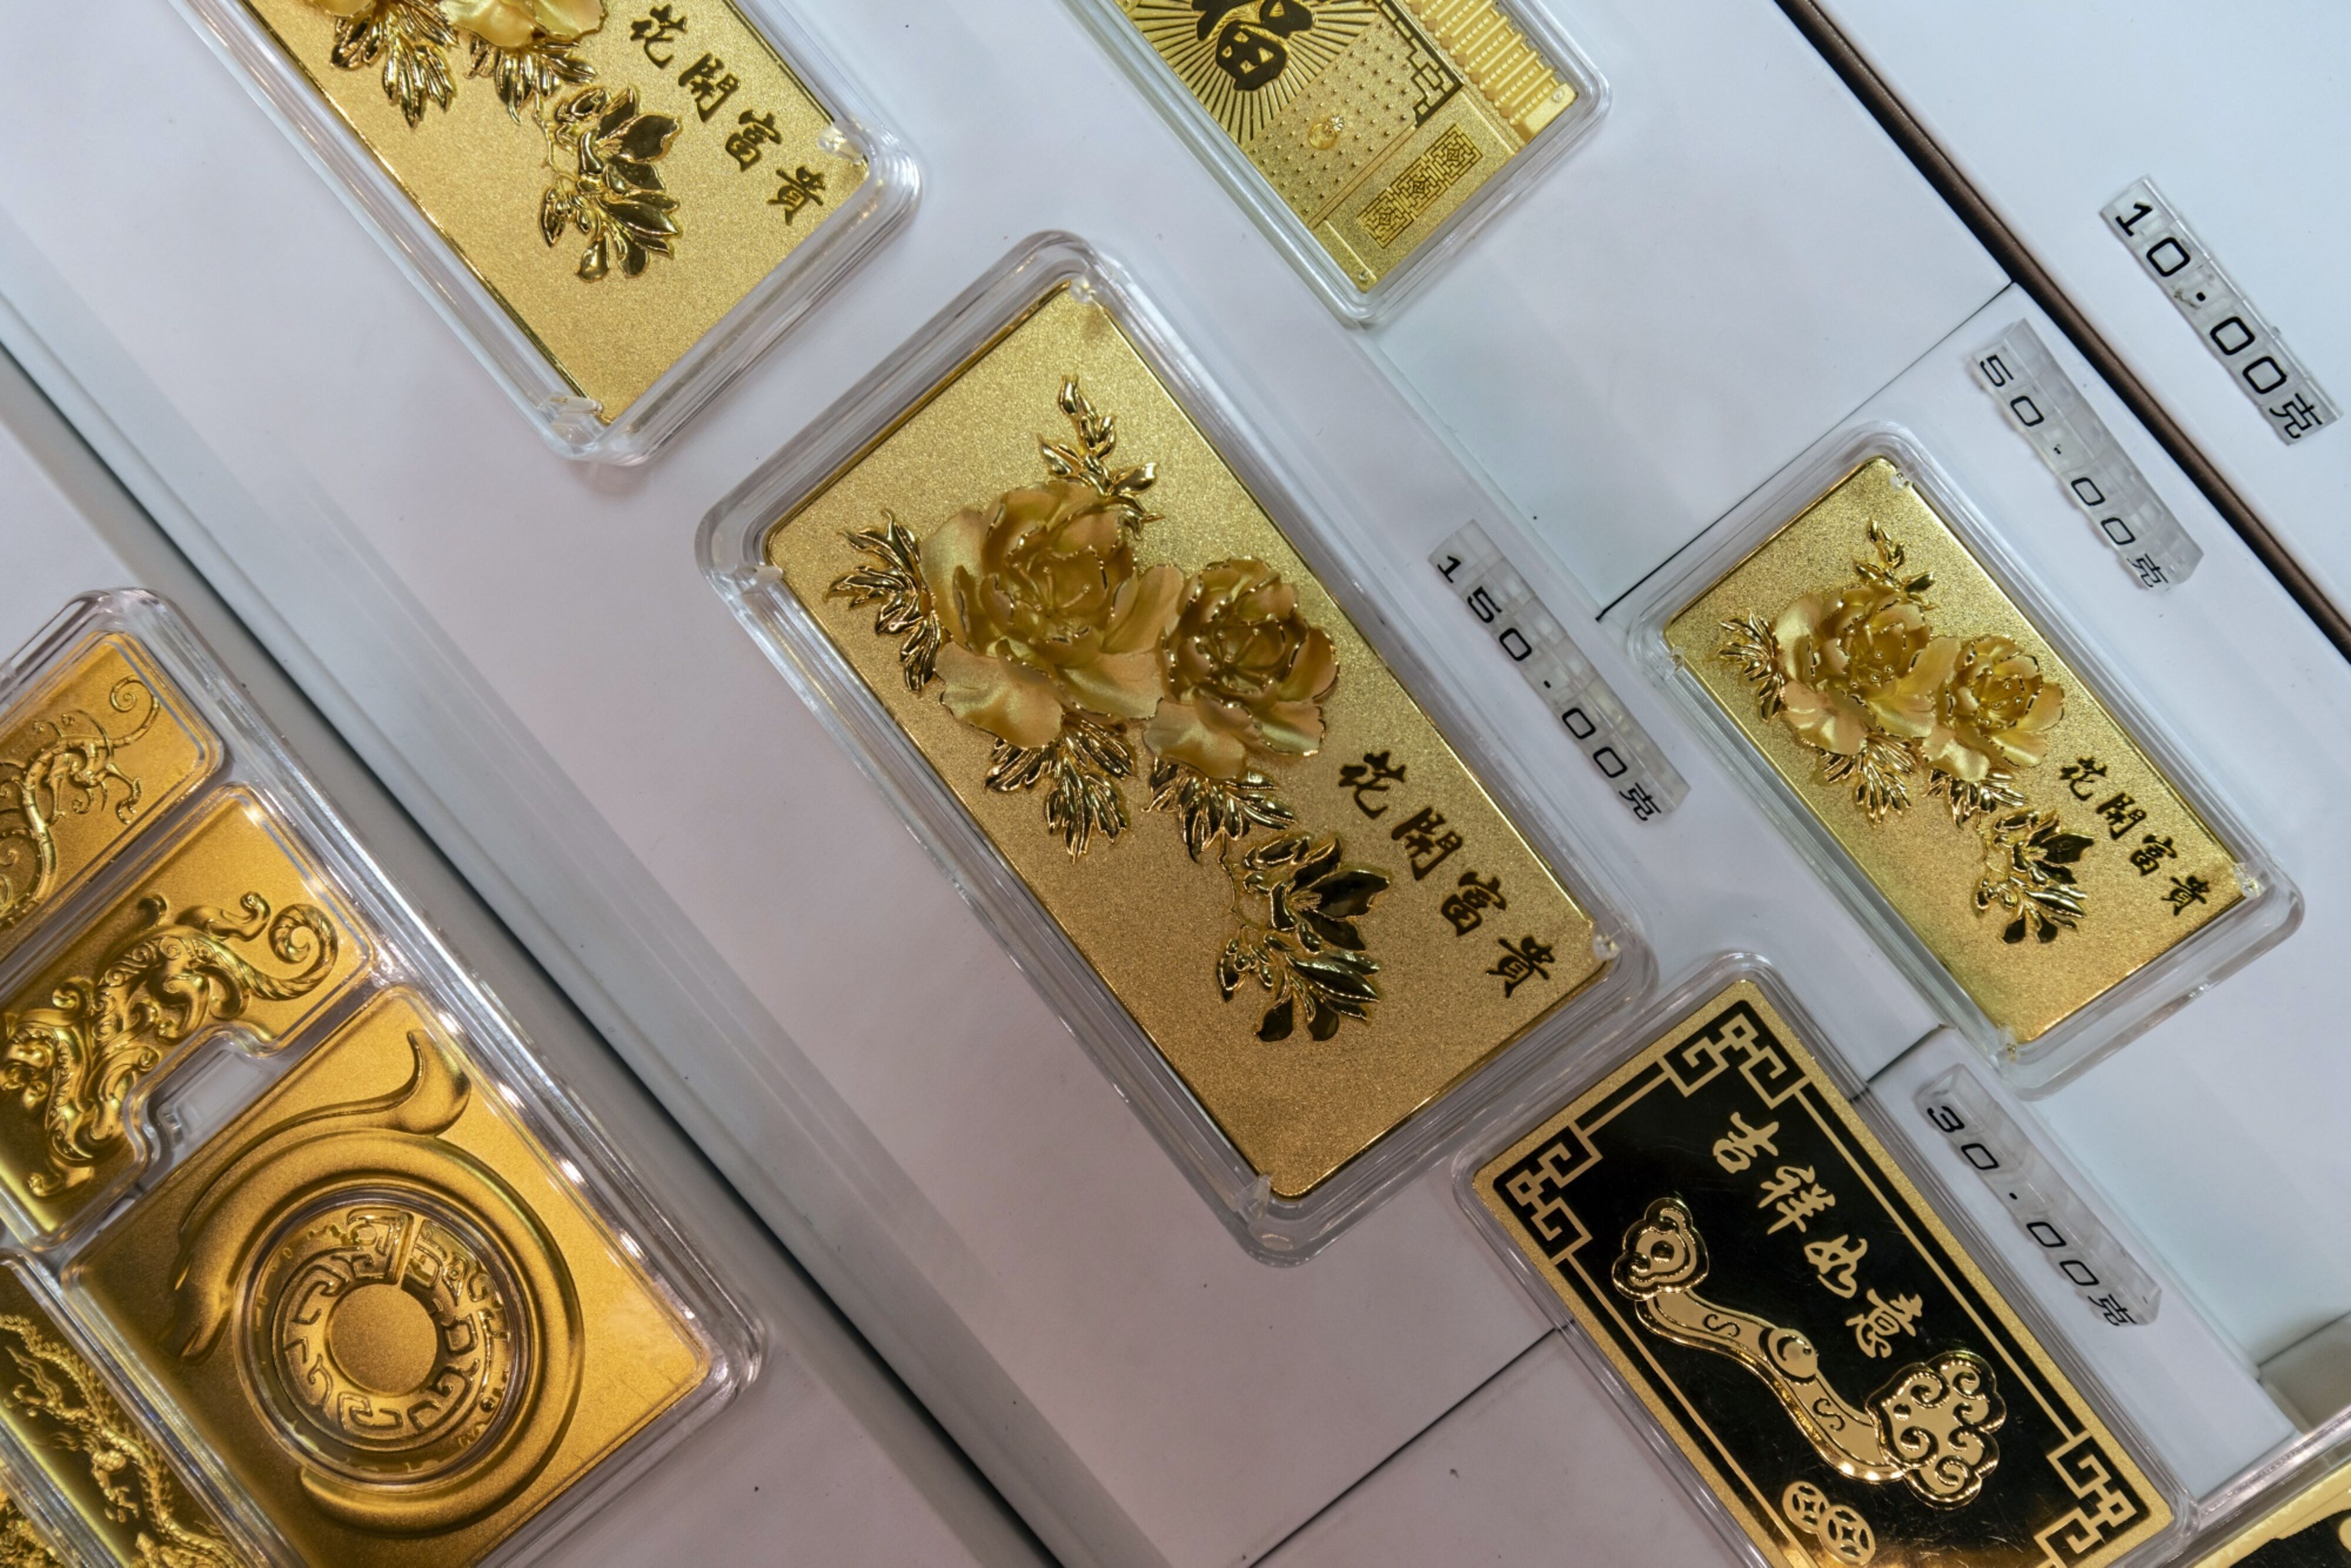 Gold bars for sale at a jewelry store in Shanghai on March 13. Photo: Bloomberg